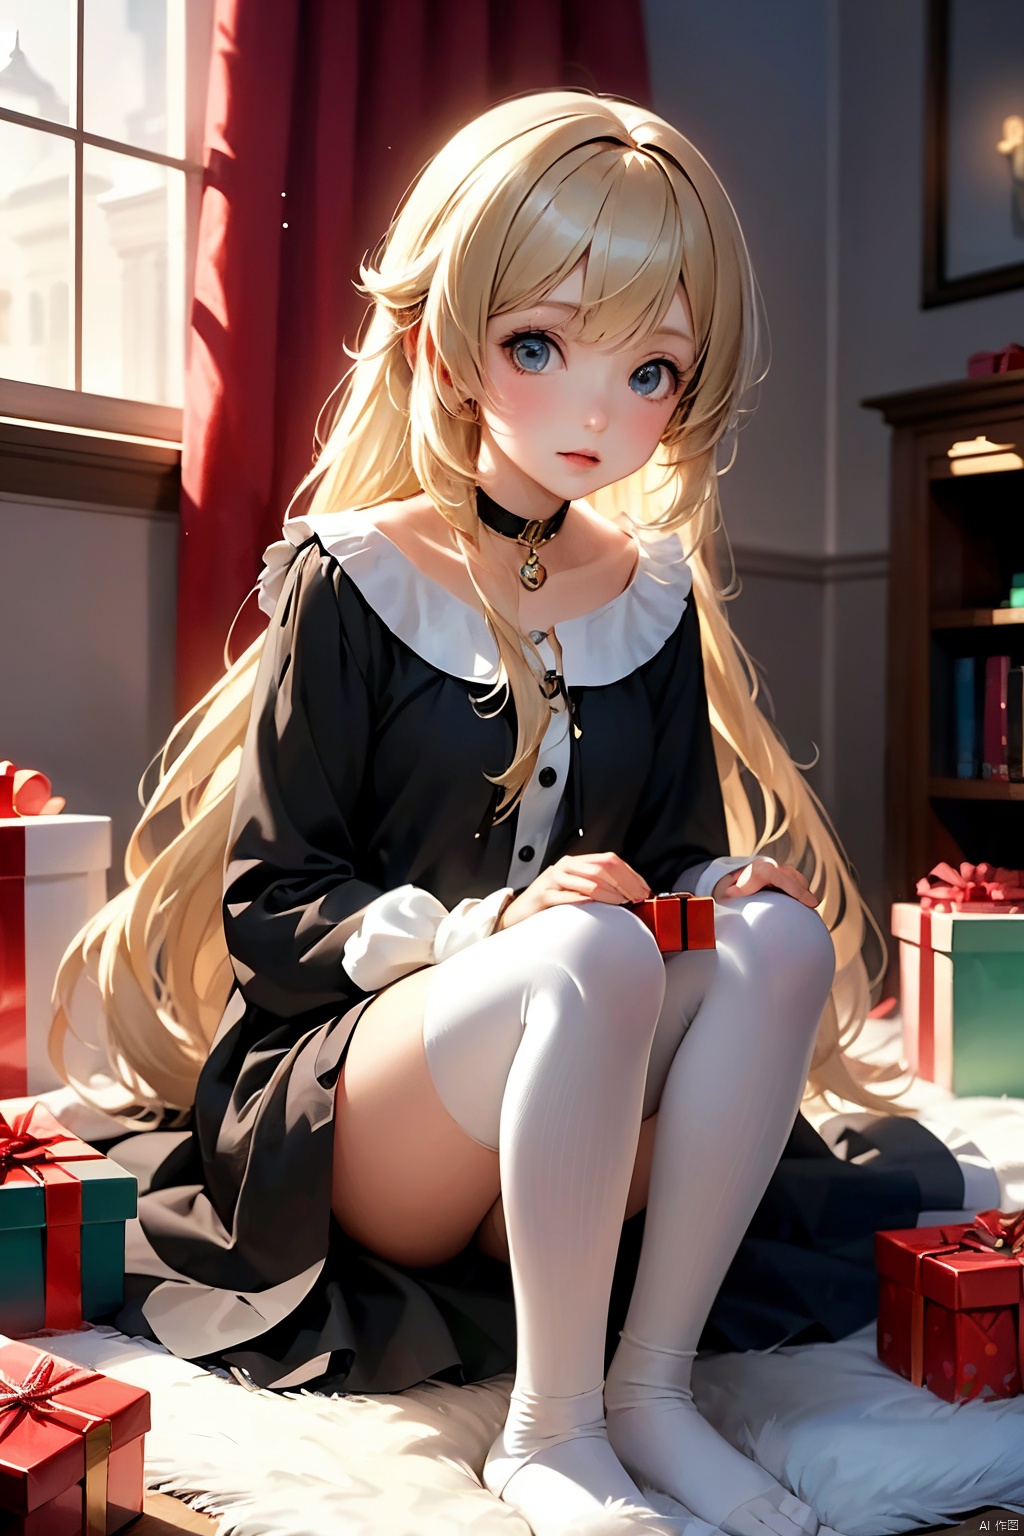 a girl sitting on the floor with presents around her, an anime drawing by Yang J, pixiv contest winner, fantasy art, beautiful anime girl, cute anime girl, cute anime waifu in a nice dress, anime visual of a cute girl, anime girl with long hair, pretty anime girl, attractive anime girl, beautiful anime woman, young anime girl, (anime girl)